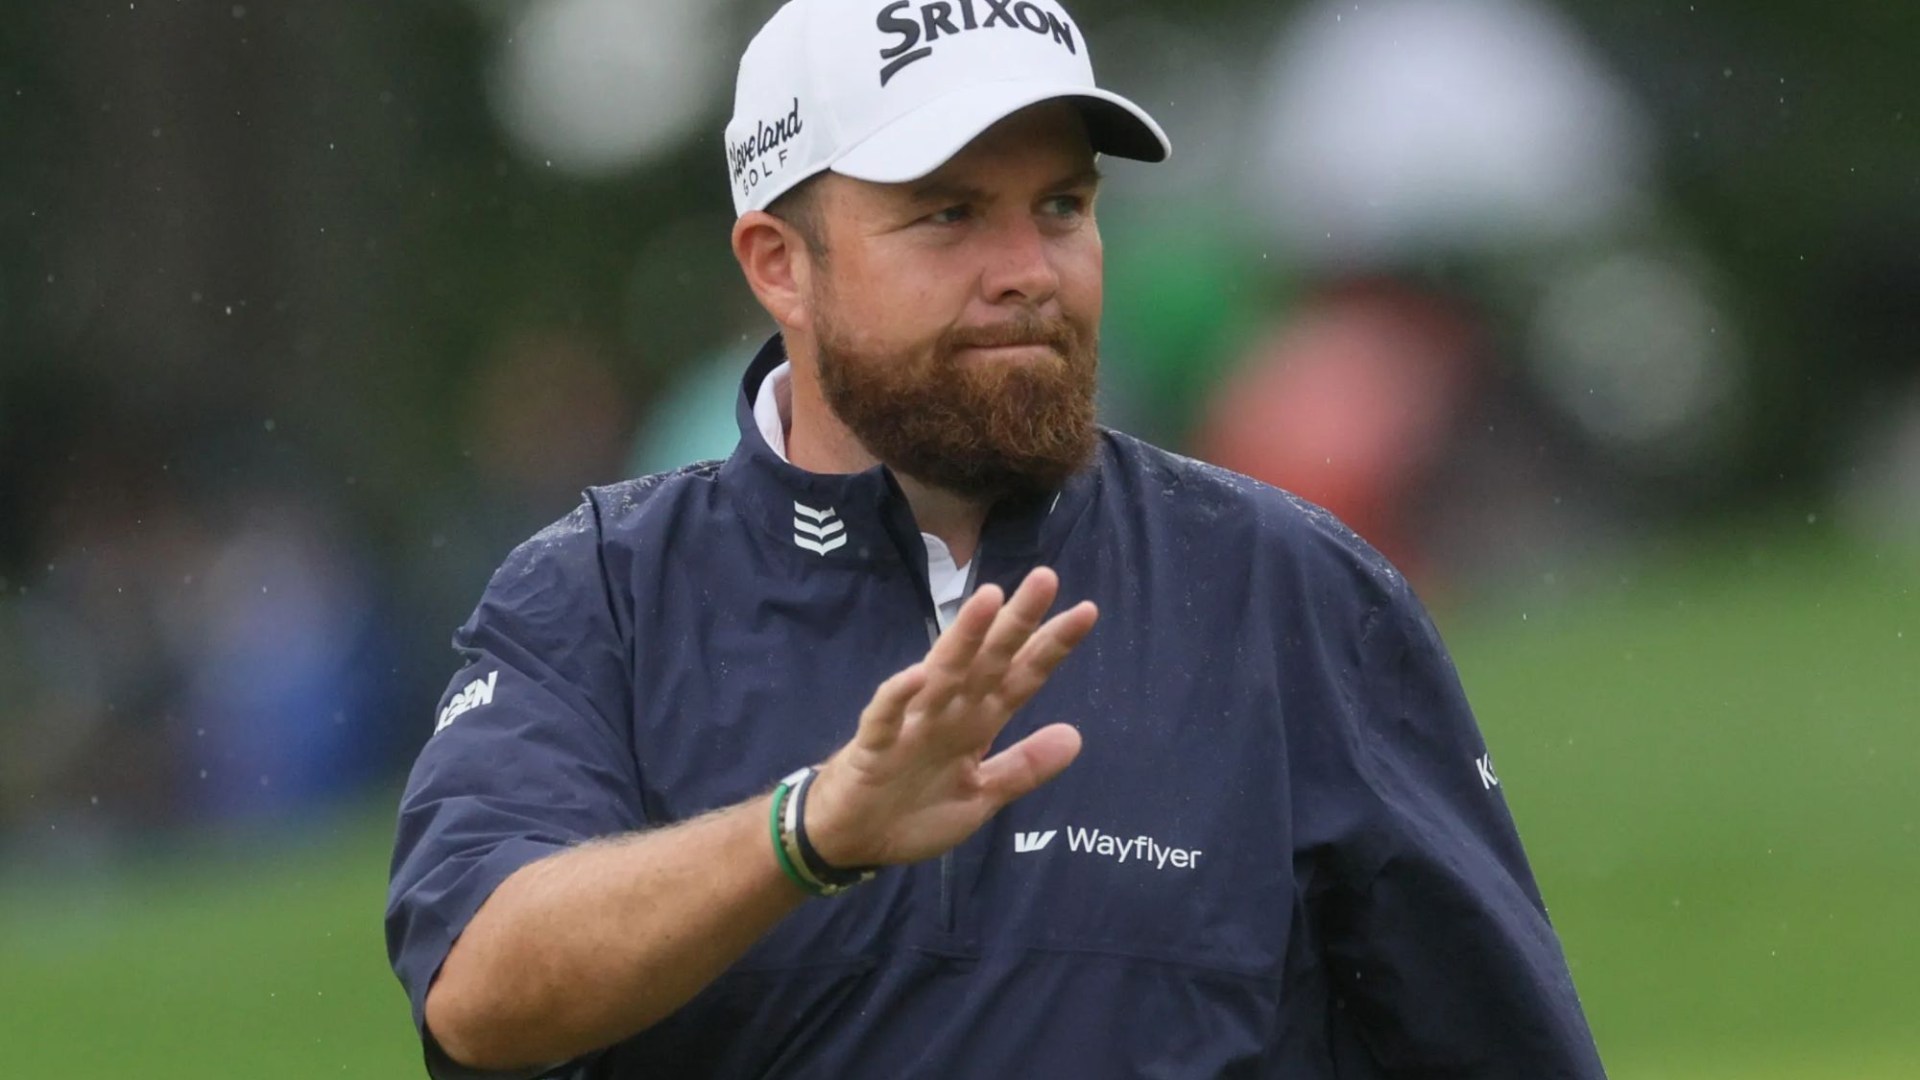 Shane Lowry makes emotional tribute to volunteer killed at Valhalla before detailing 